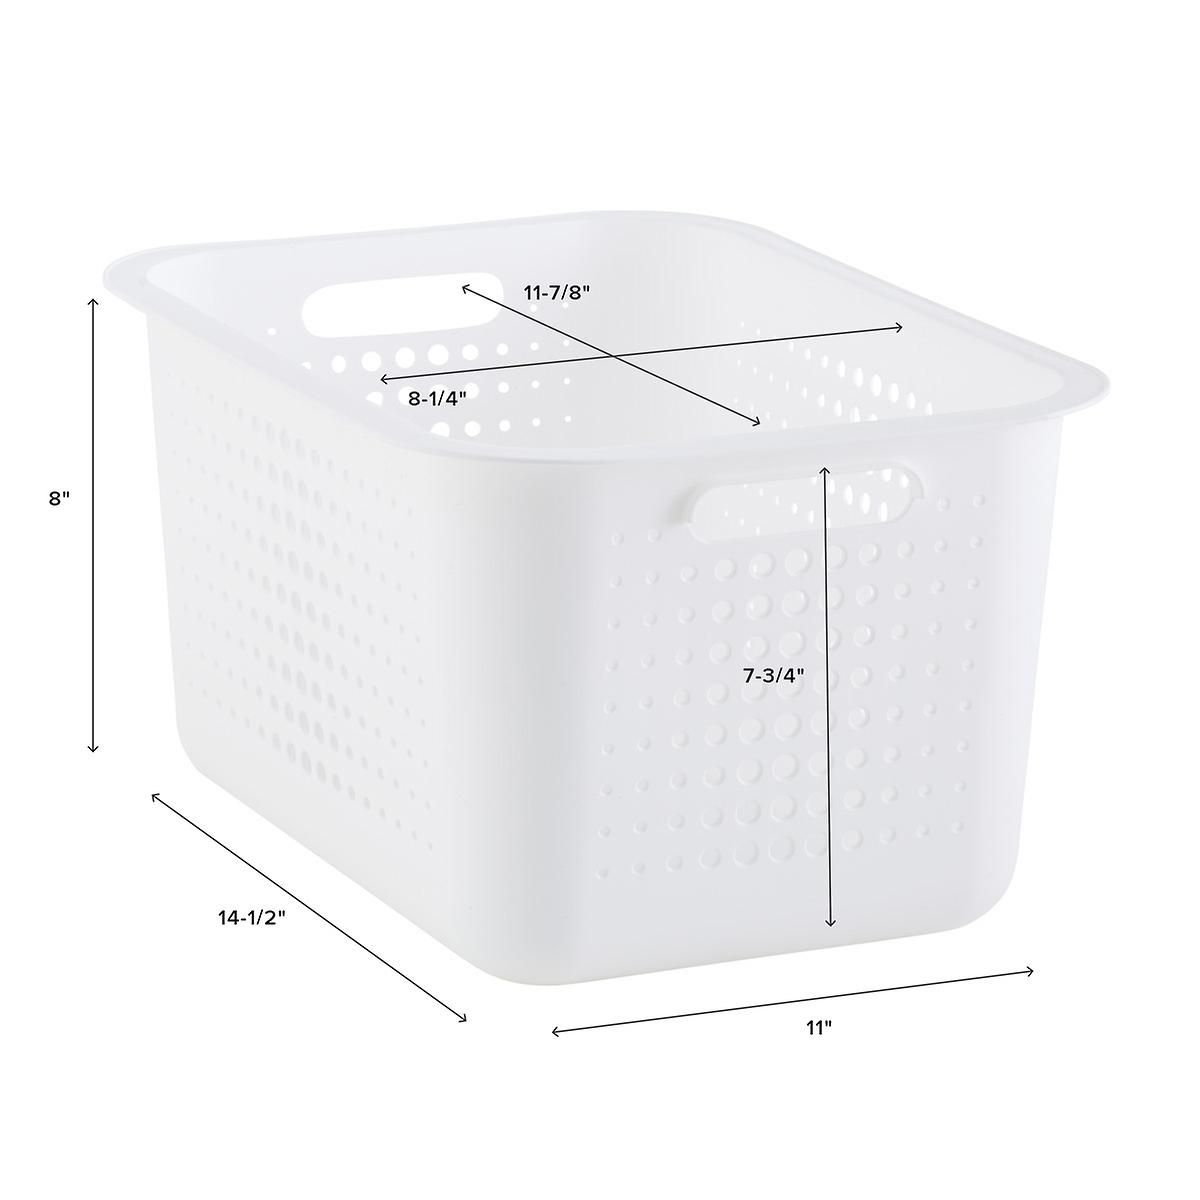 SmartStore Large Nordic Basket White | The Container Store